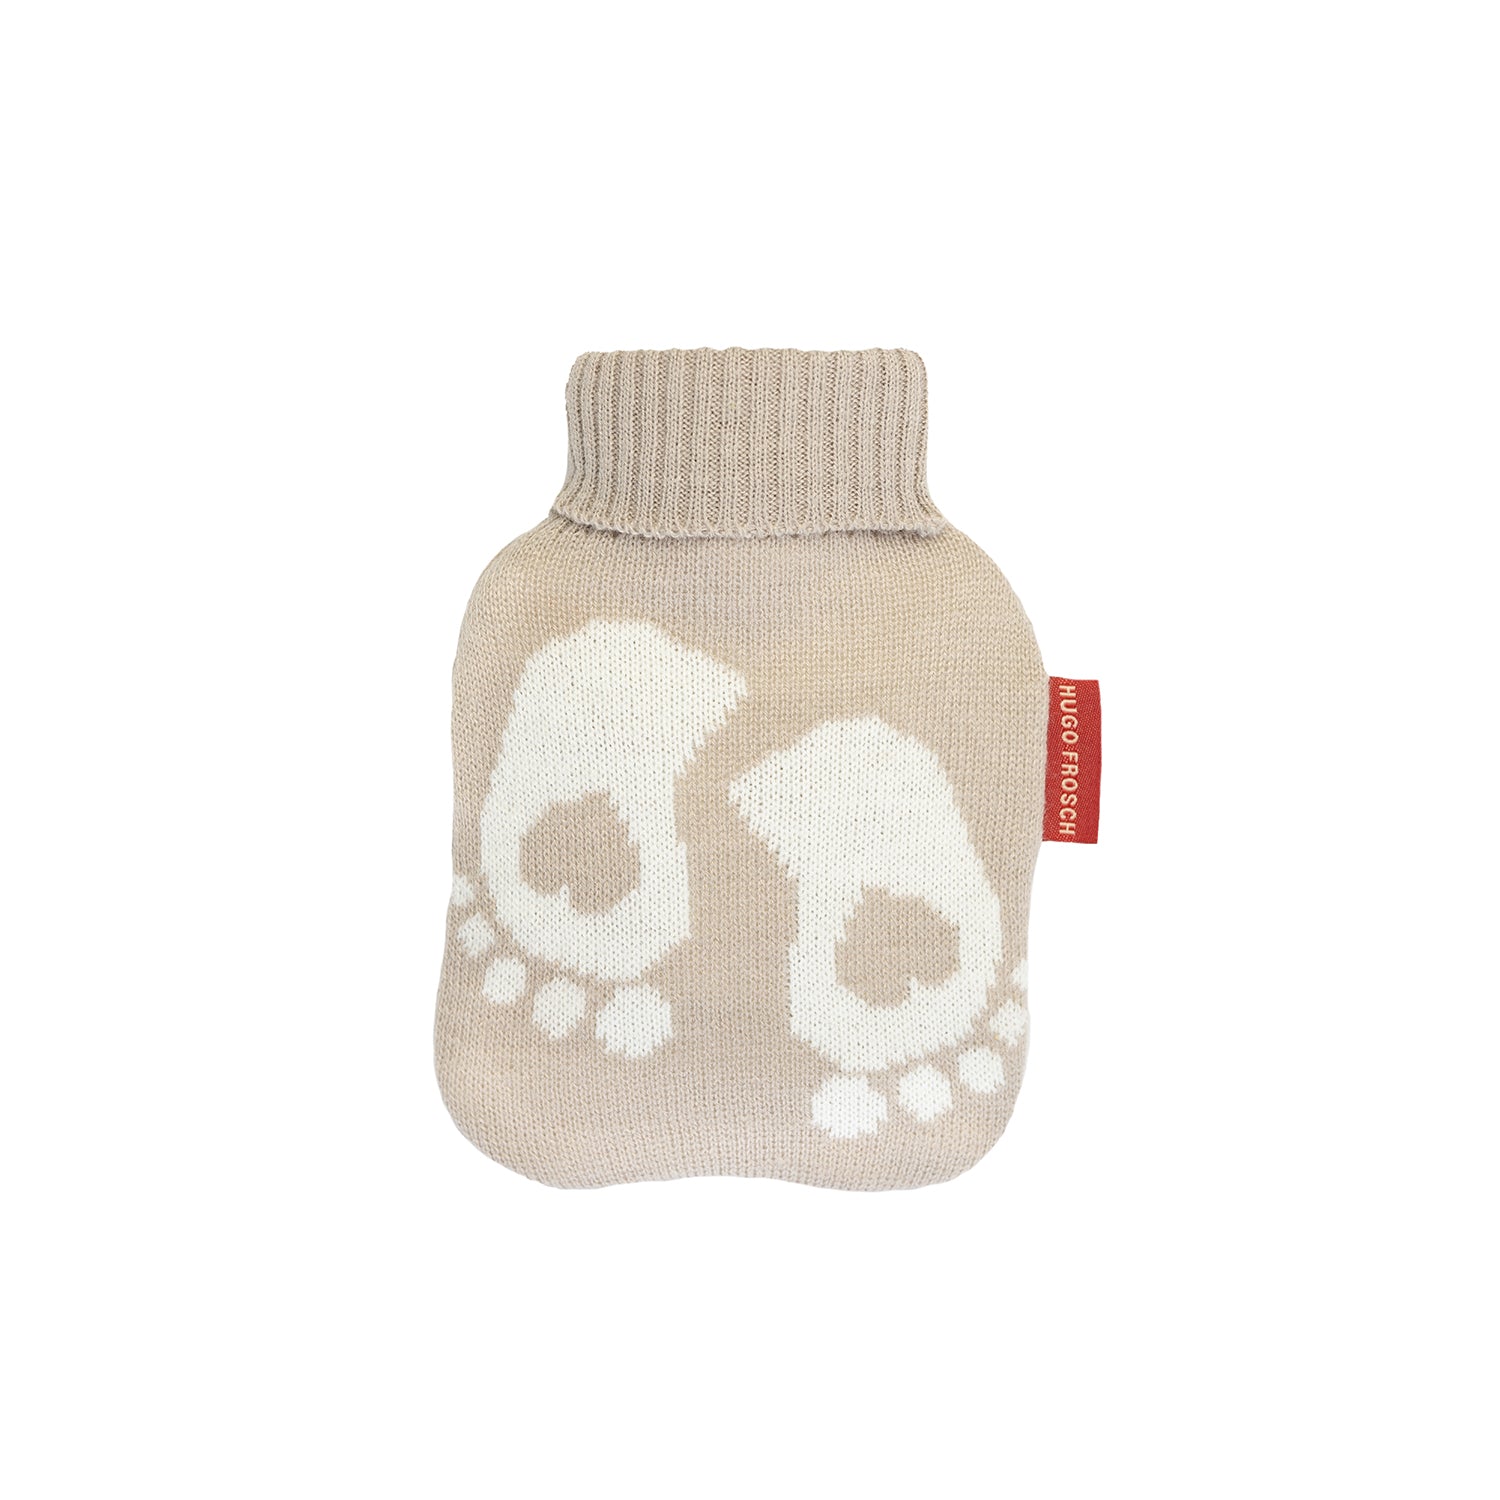 0.2 Litre Luxury Mini Hot Water Bottle with Baby Feet Pastel Brown Fine Knitted Cover (rubberless)